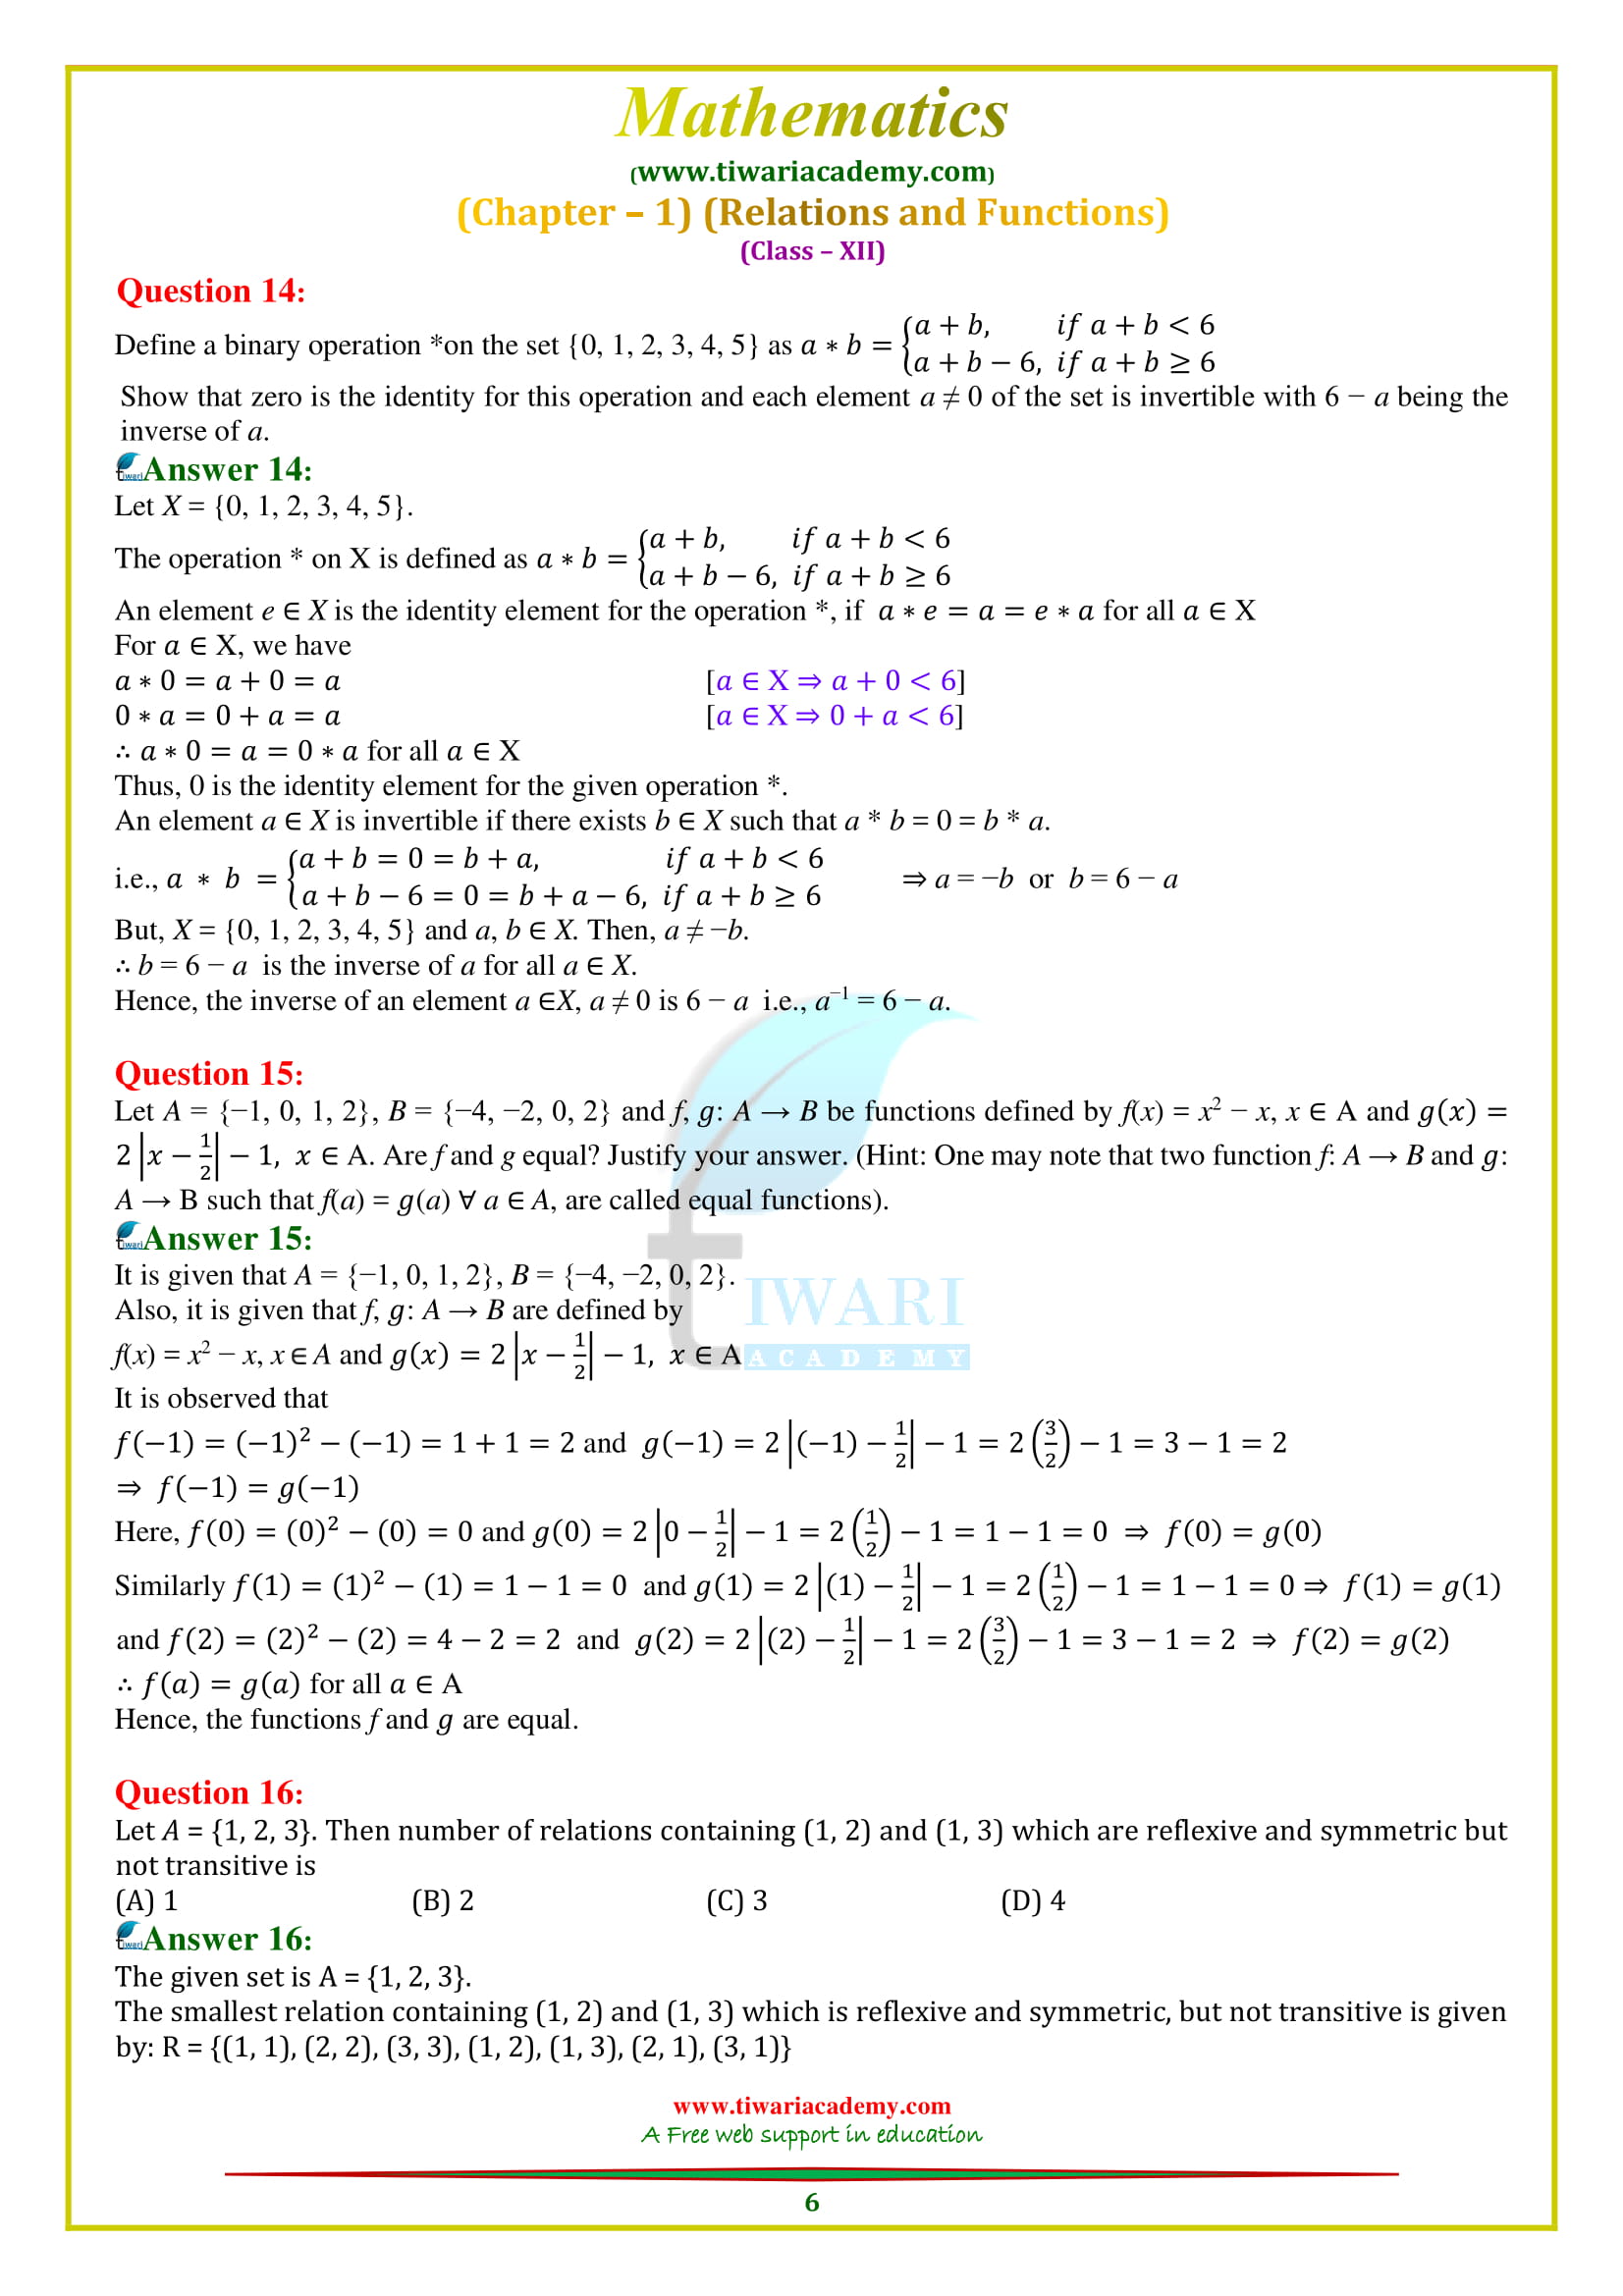 12 Maths Chapter 1 Miscellaneous Exercise for intermediate students.